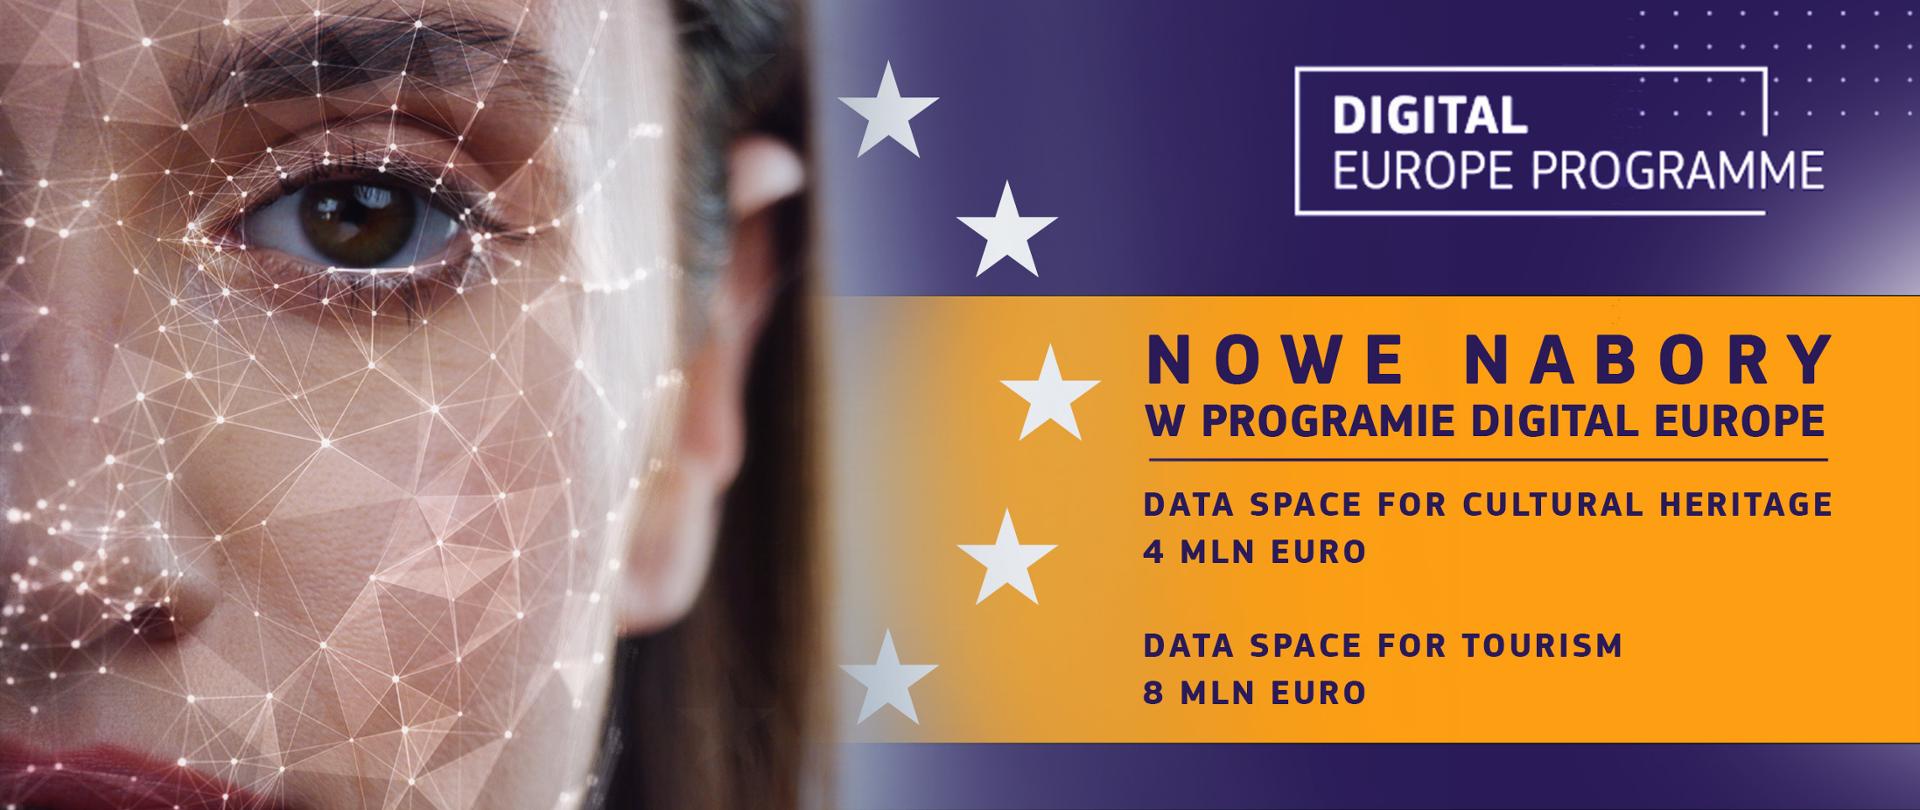 Digital Europe Programm nowe nabory Data Space for Cultural Heritage oraz Data Space for Tourism